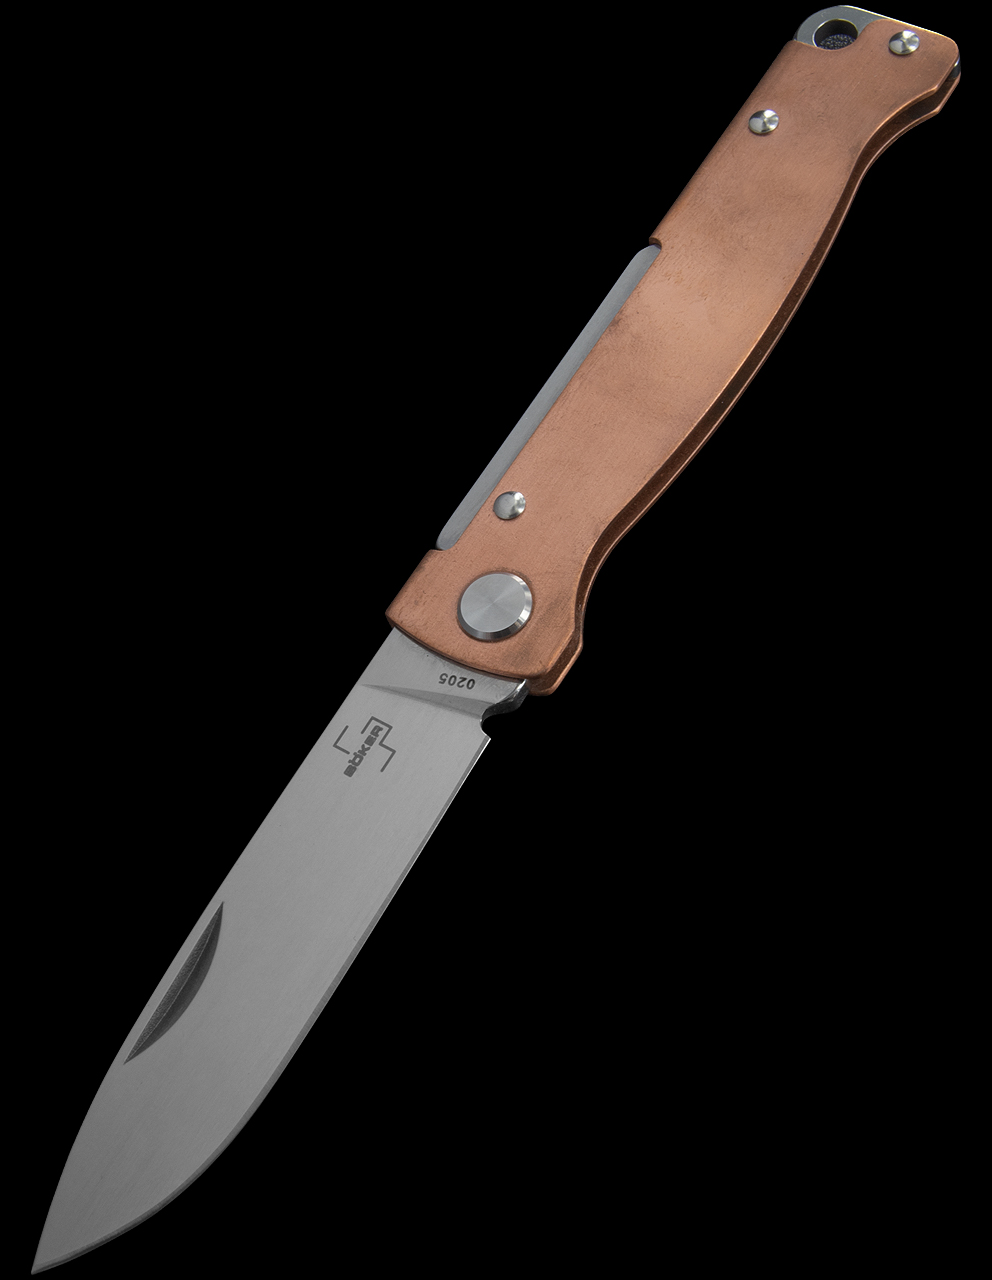 Here's a nice discreet Budget Blade: Boker Plus Atlas Slipjoint: With  Copper handle : r/BudgetBlades